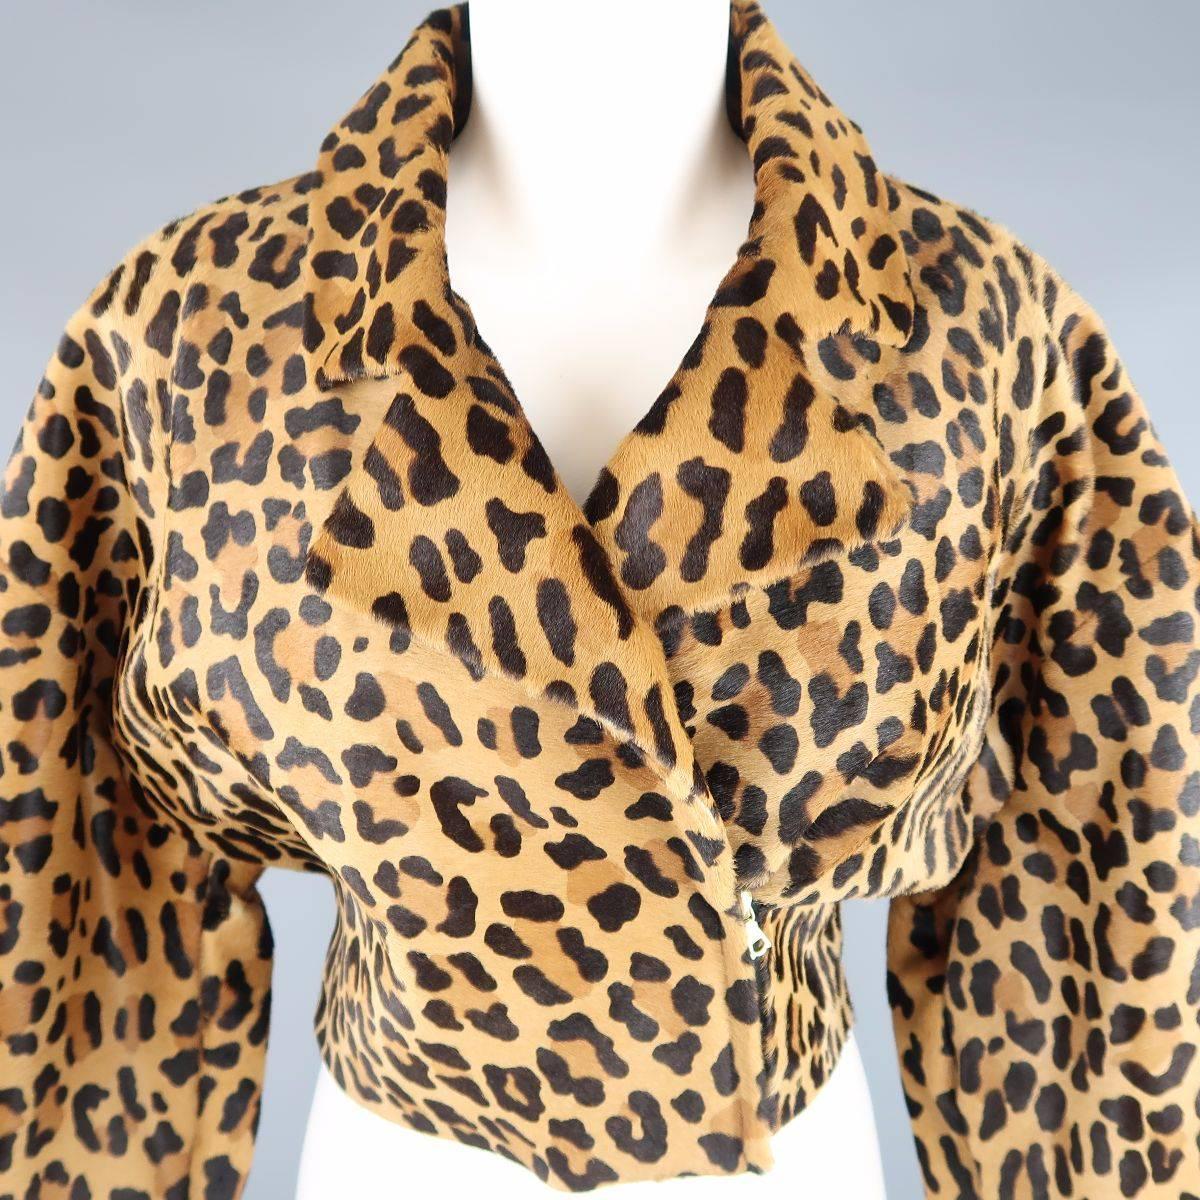 This fabulous ALBERTA FERRETTI jacket comes in a leopard cheetah print calf hair leather and features a double breasted biker jacket style zip front, cropped hem, and wide , cuffed sleeves. Tag removed. Made in Italy.

Good Pre-Owned